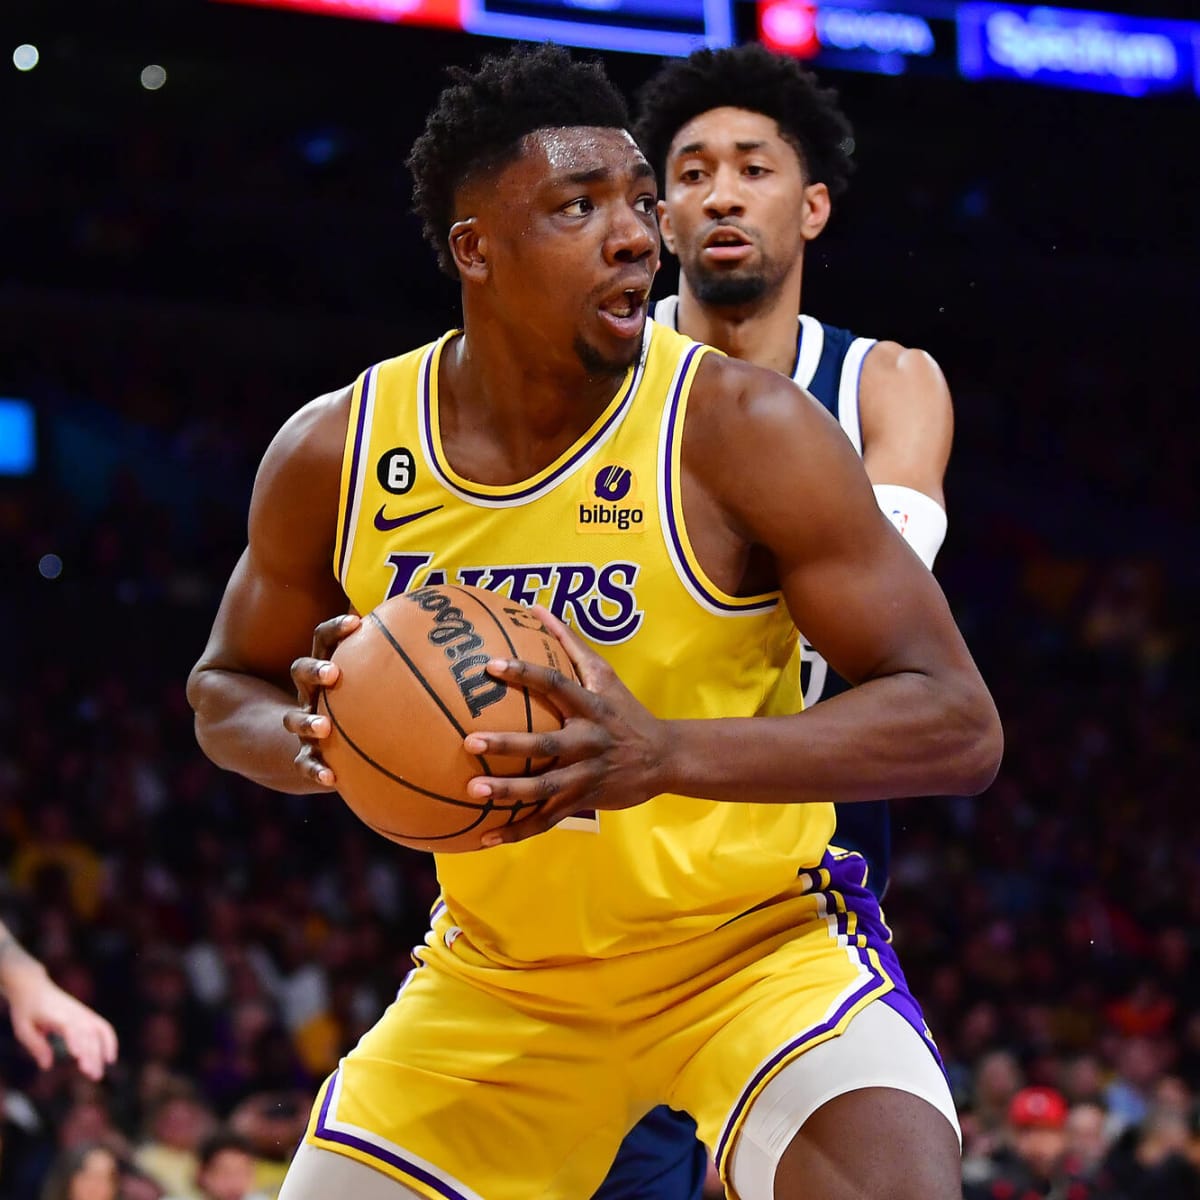 Reggie Miller questions Thomas Bryant not wanting to play with